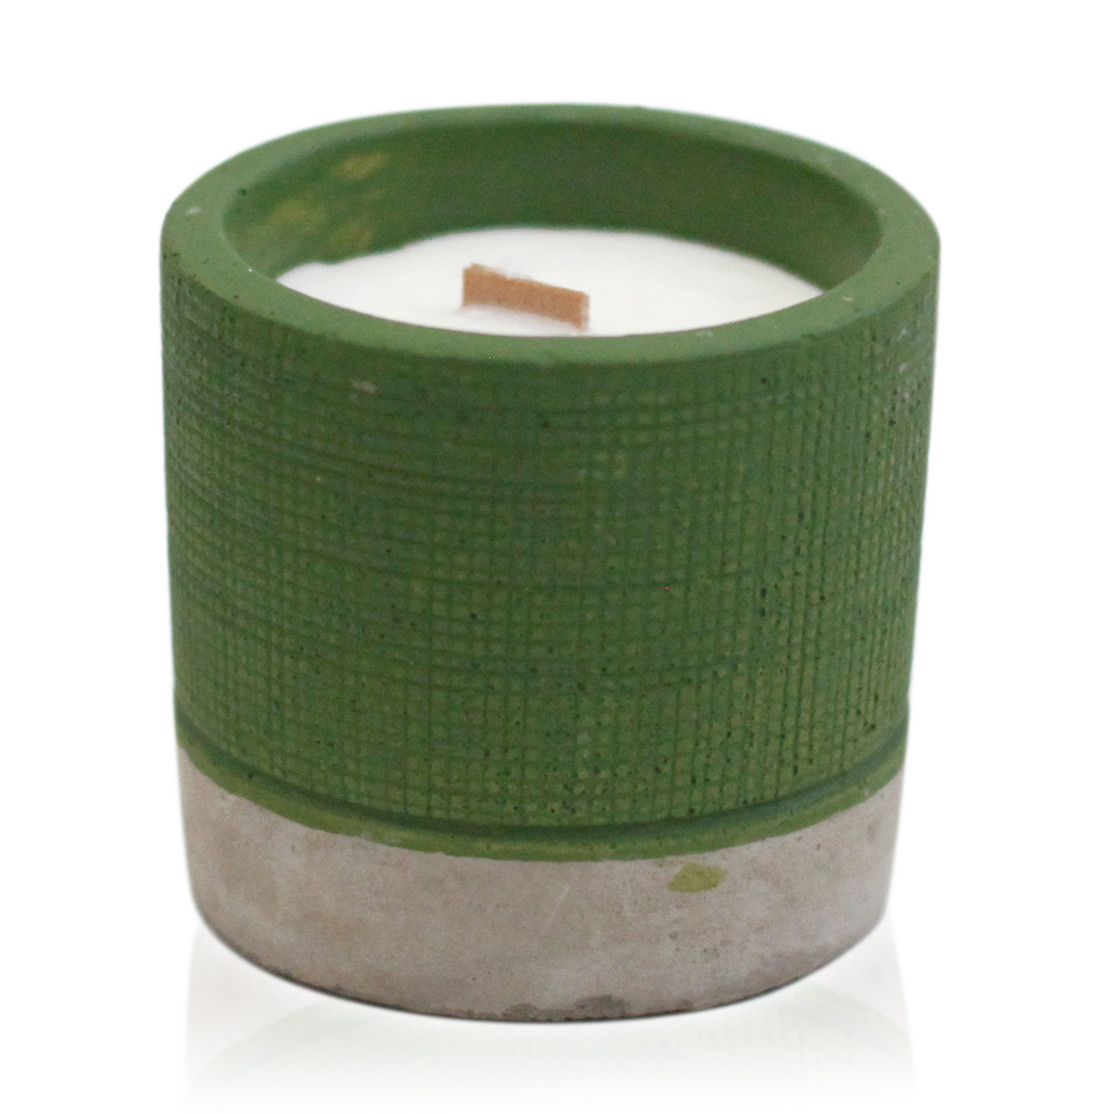 Pot Concrete Soy Candle - Green - Sea Moss & Herbs CWC-08